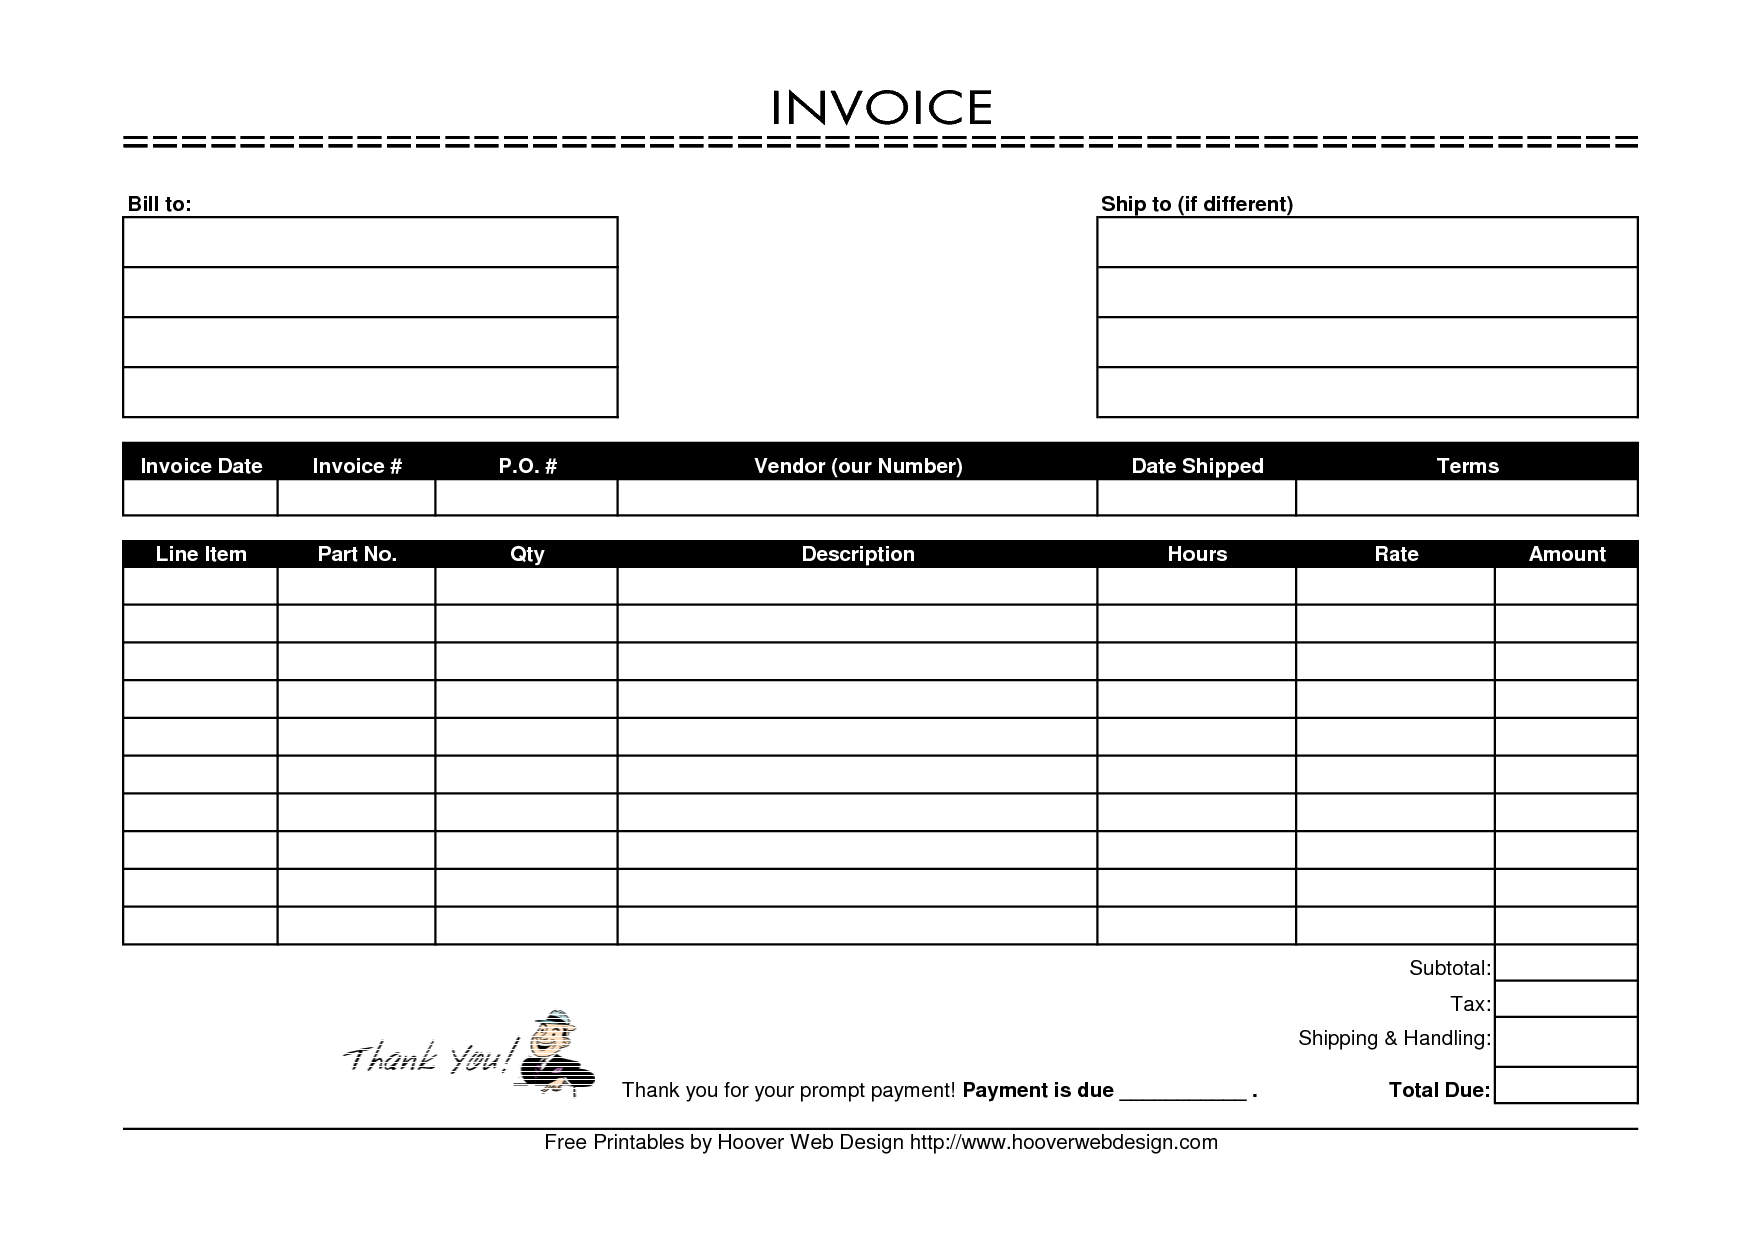 Free Printable Invoice Form Template   Resume Templates